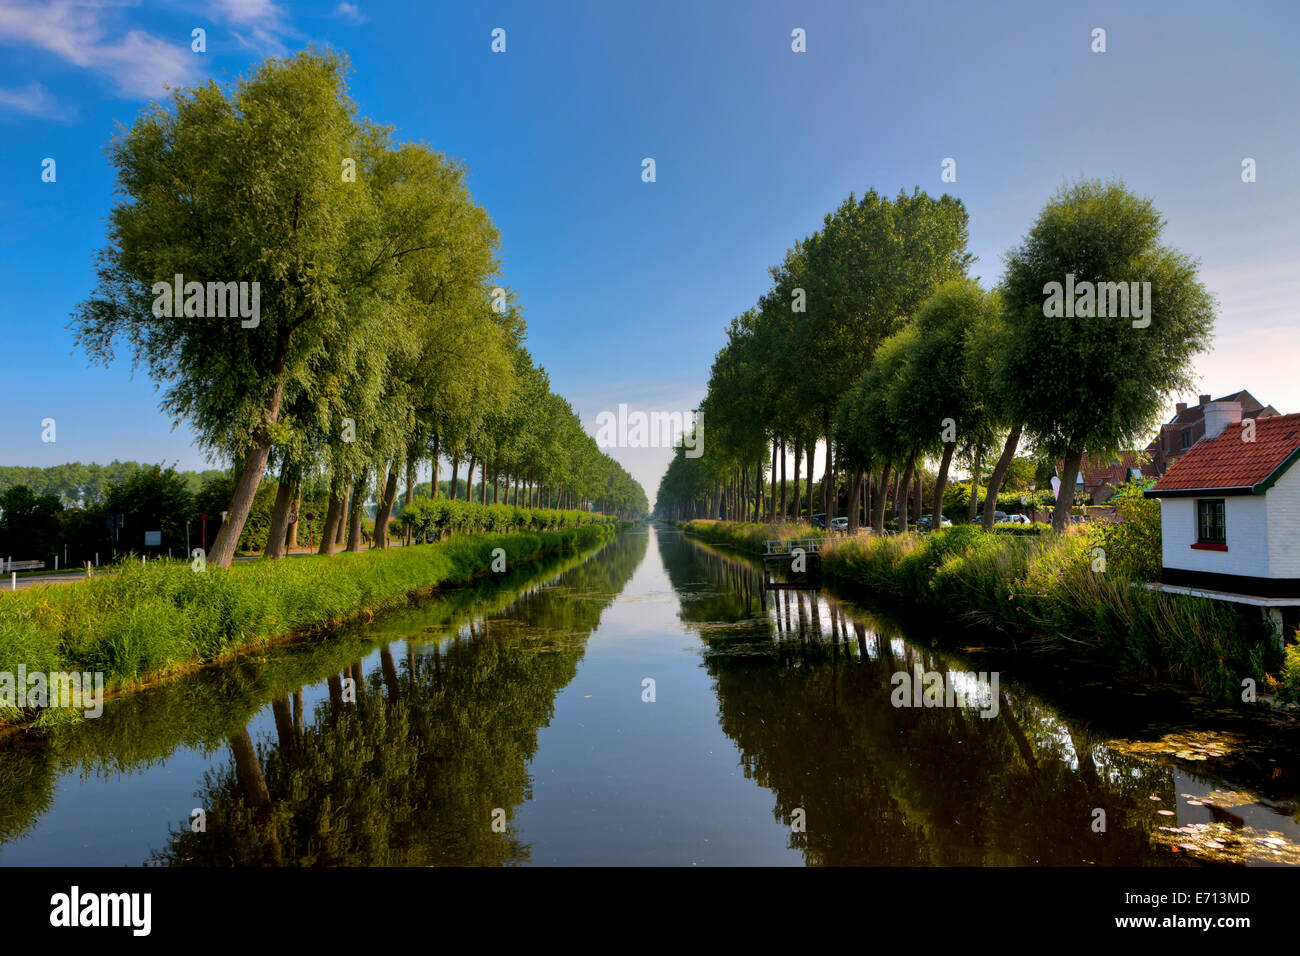 Belgium, Flanders, West Flanders, canal at Damme Stock Photo